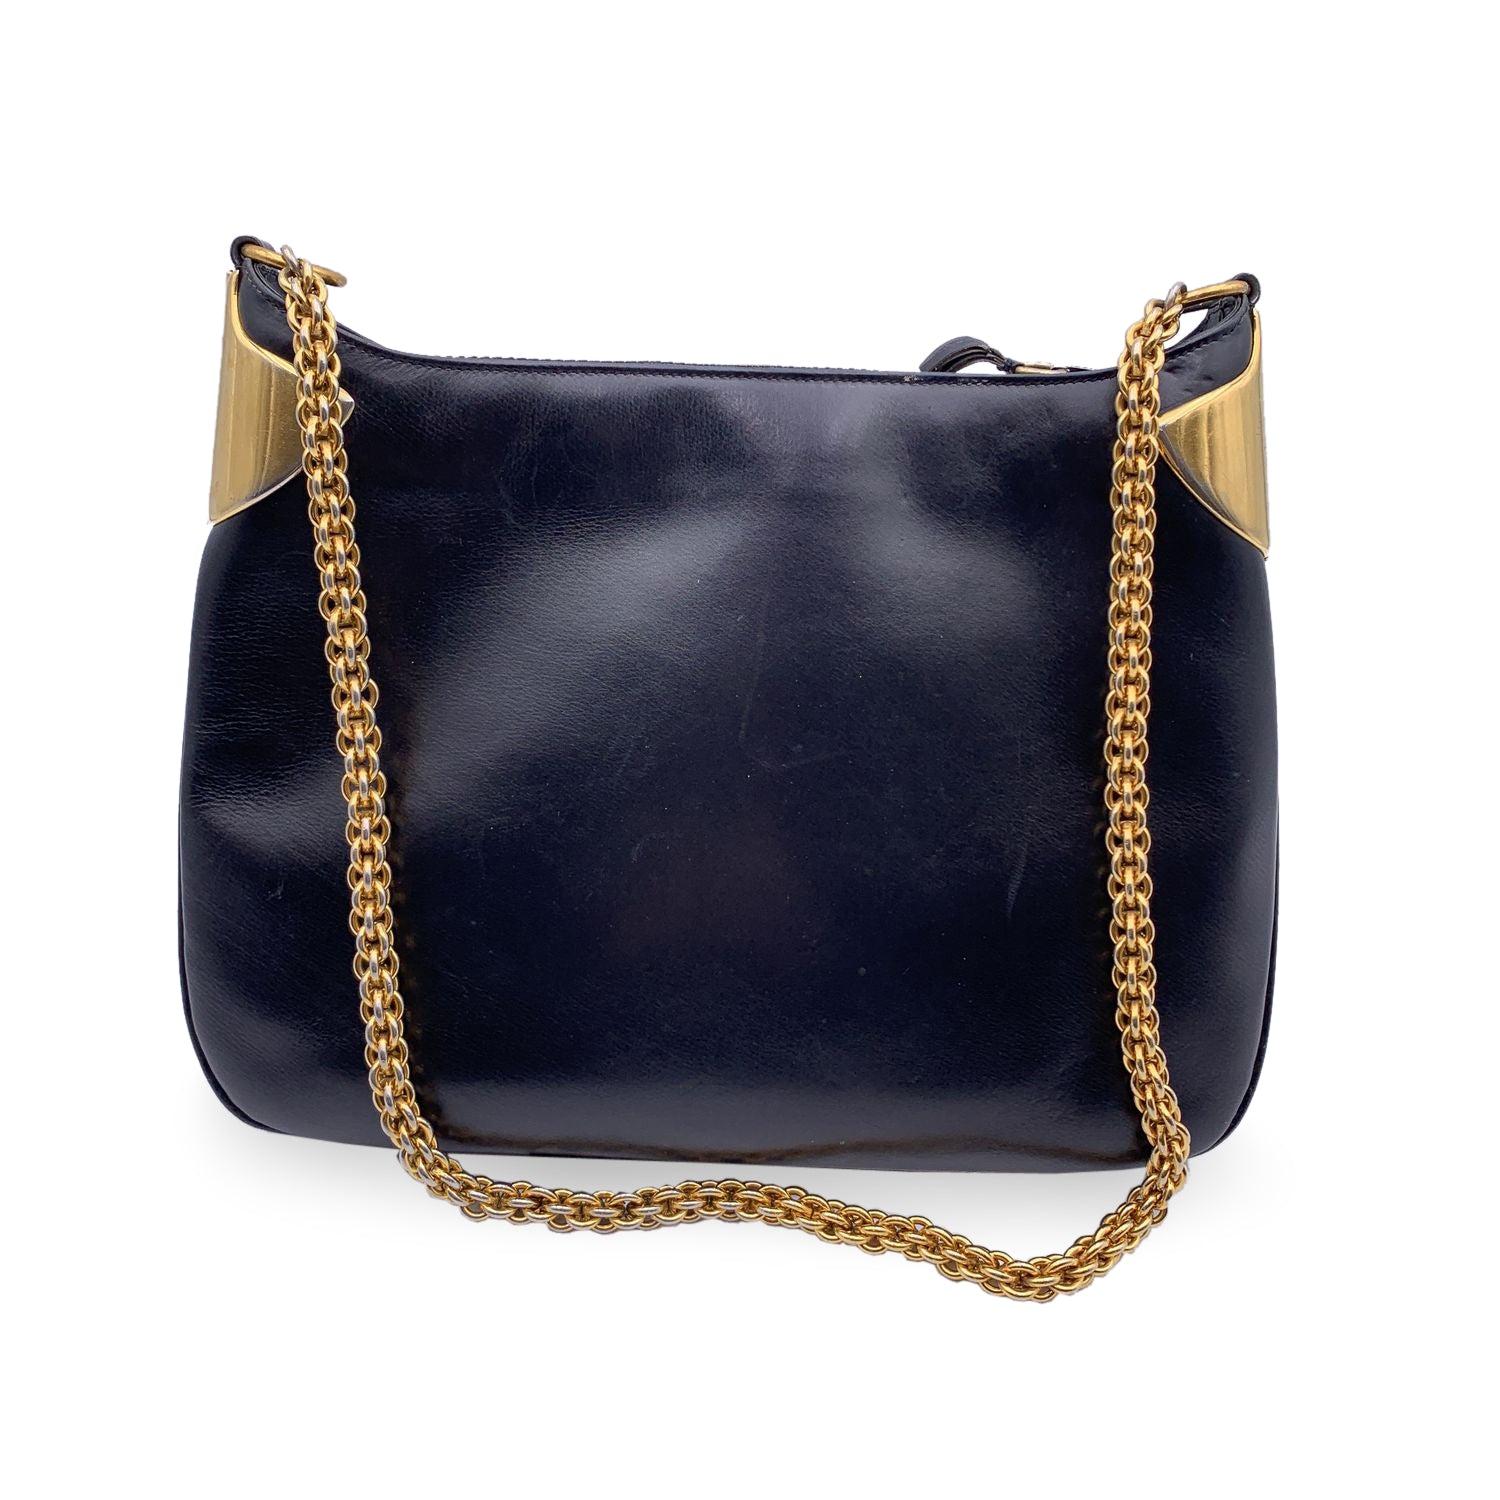 Gucci Vintage Black Leather Shoulder Bag with Chain Strap In Excellent Condition In Rome, Rome